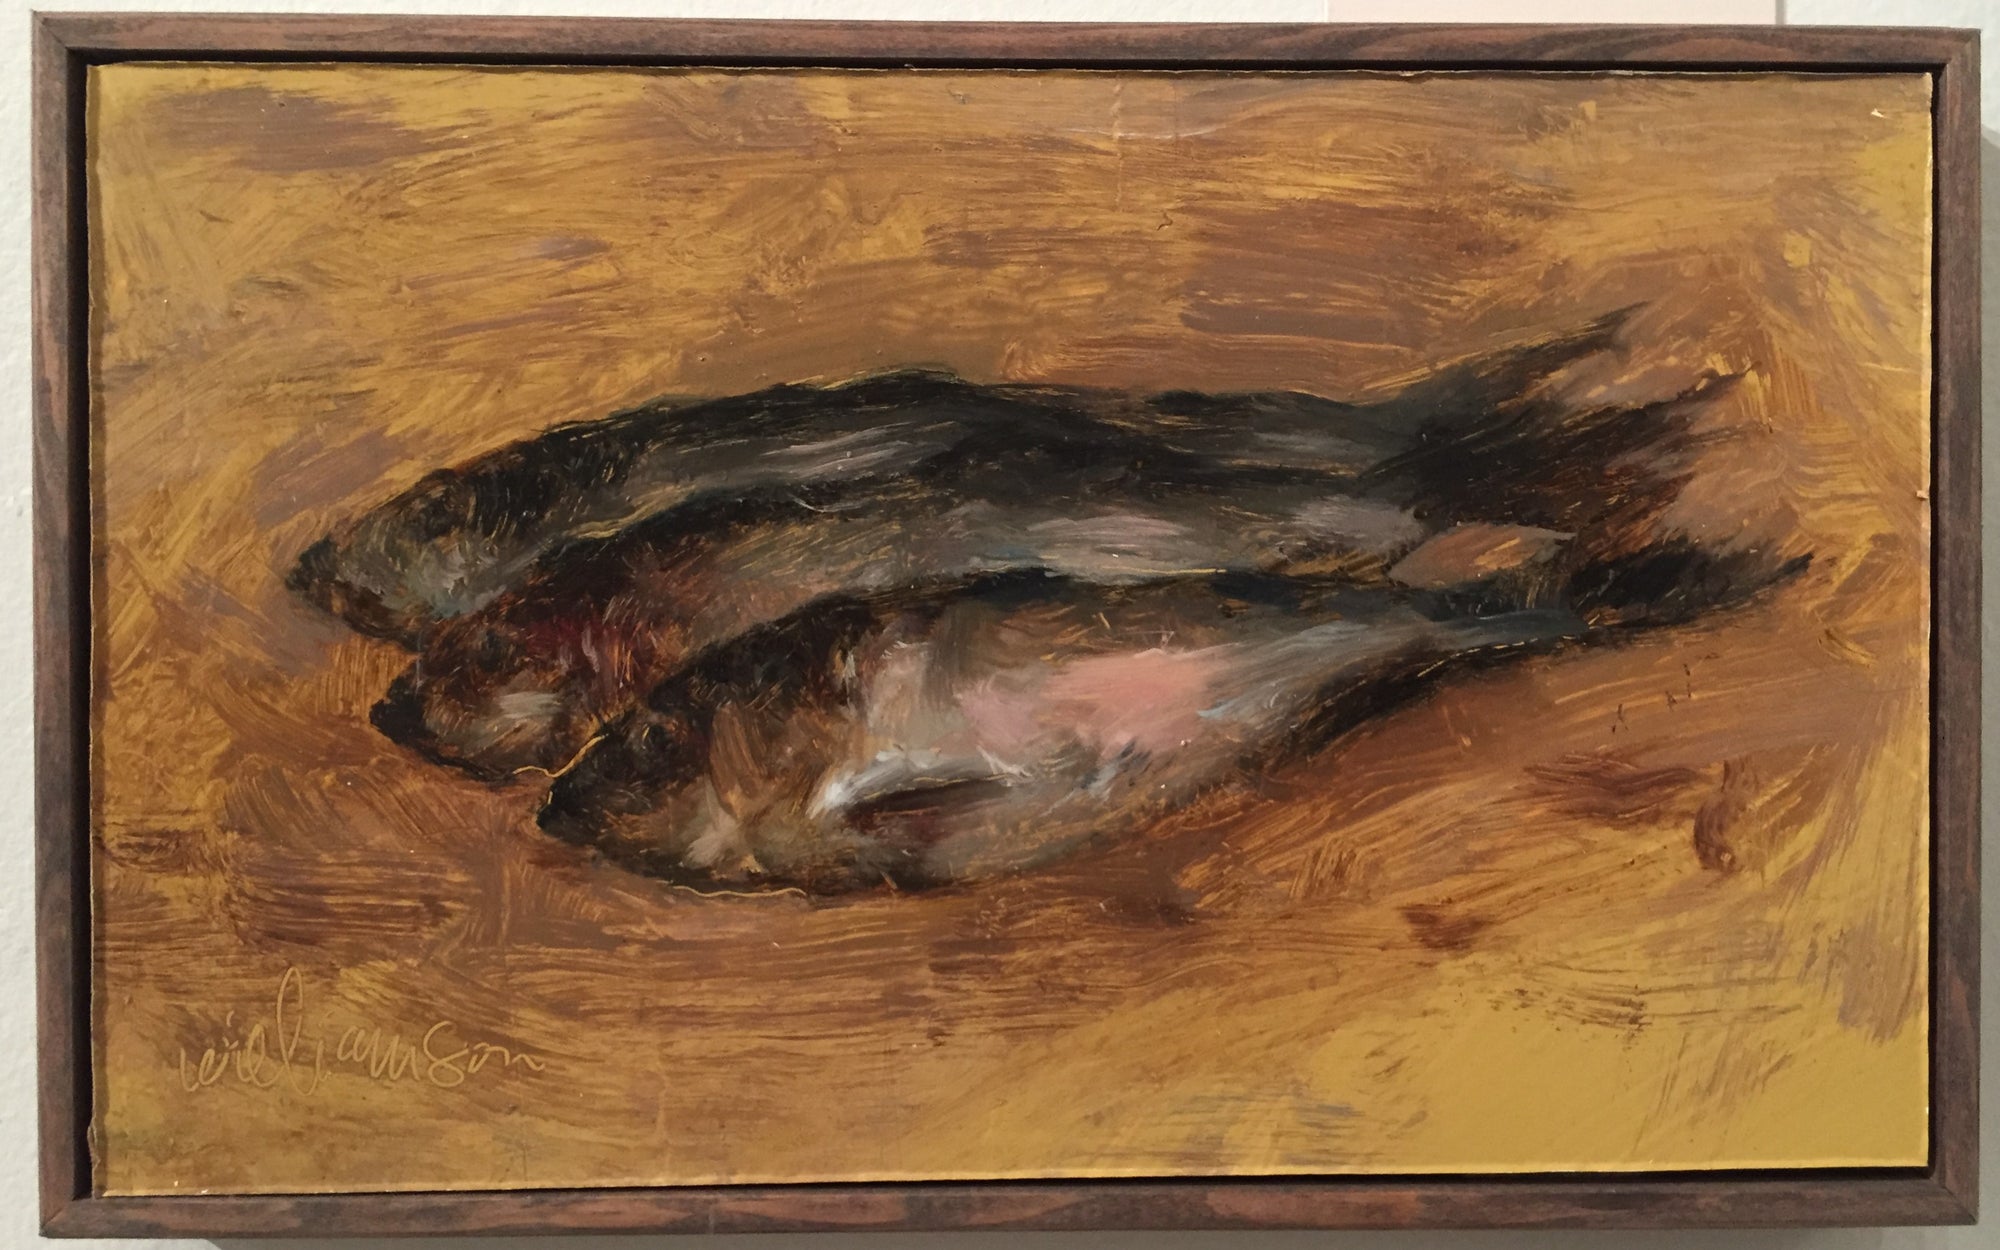 Small oil painting of herring fish dead after fishing trip in mel willamson's signature classic painting style